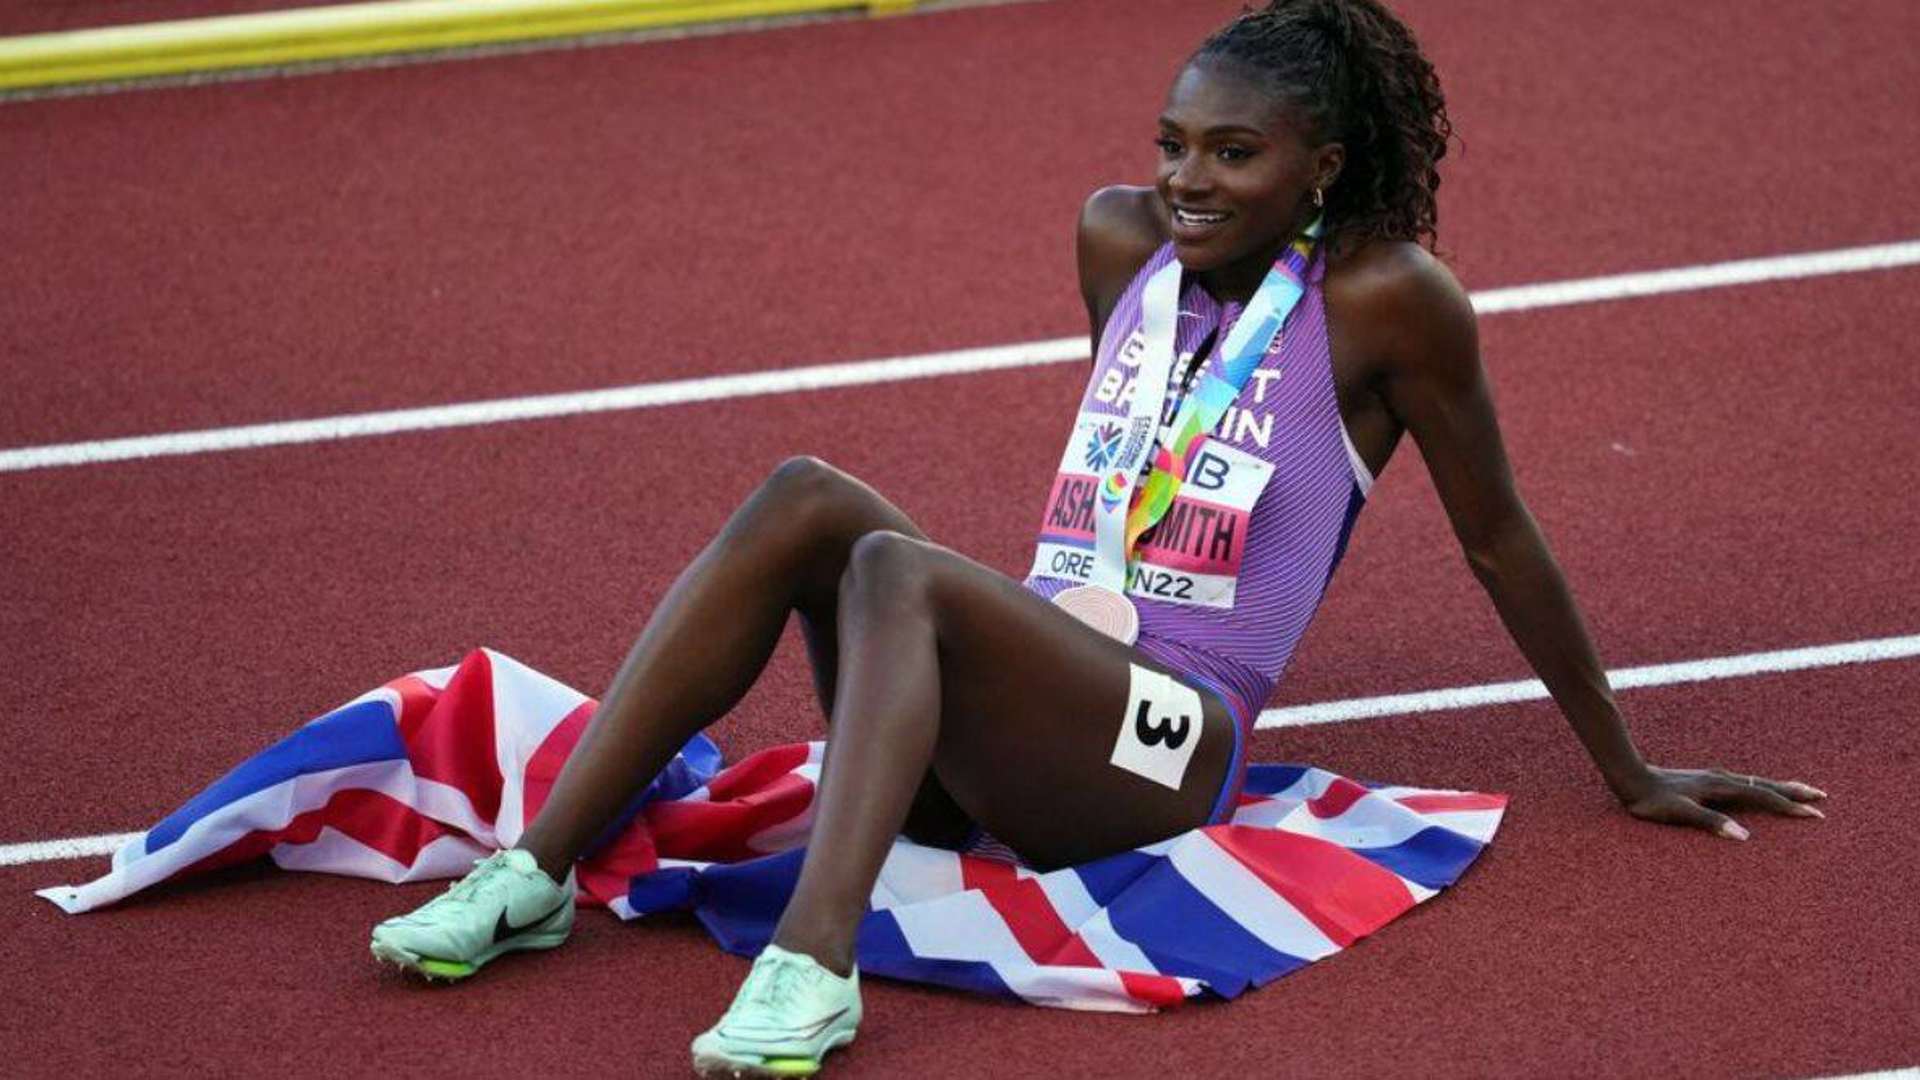 Dina Asher-Smith after winning the bronze medal in women's 200m in Oregon 2022 (Image Credits - British Athletics)